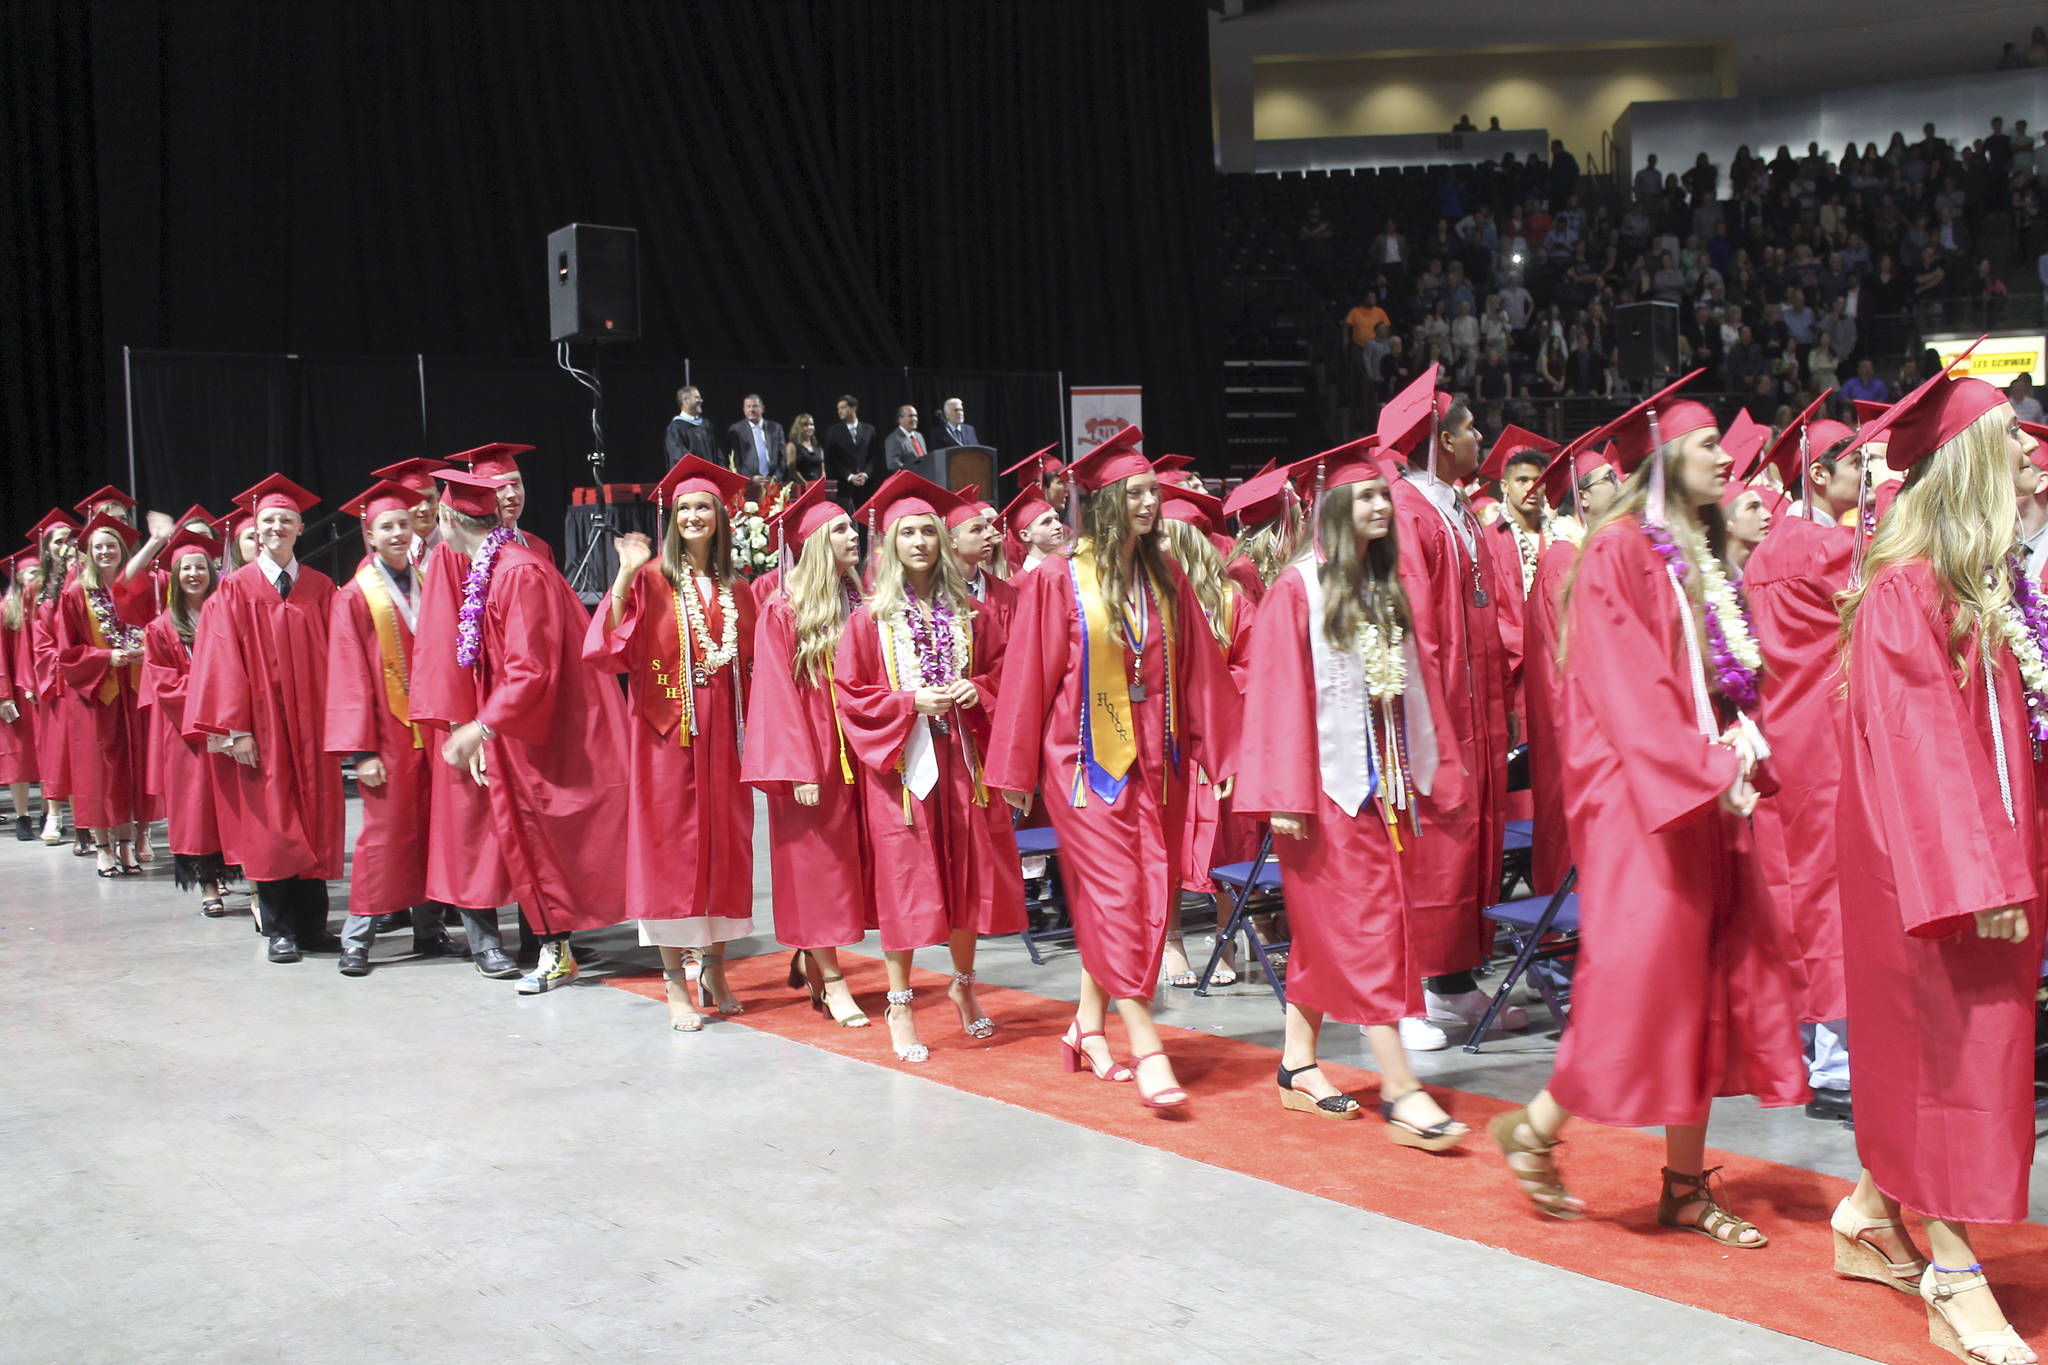 Mount Si High School students walk into their graduation ceremony. Photo courtesy of Mount Si High School